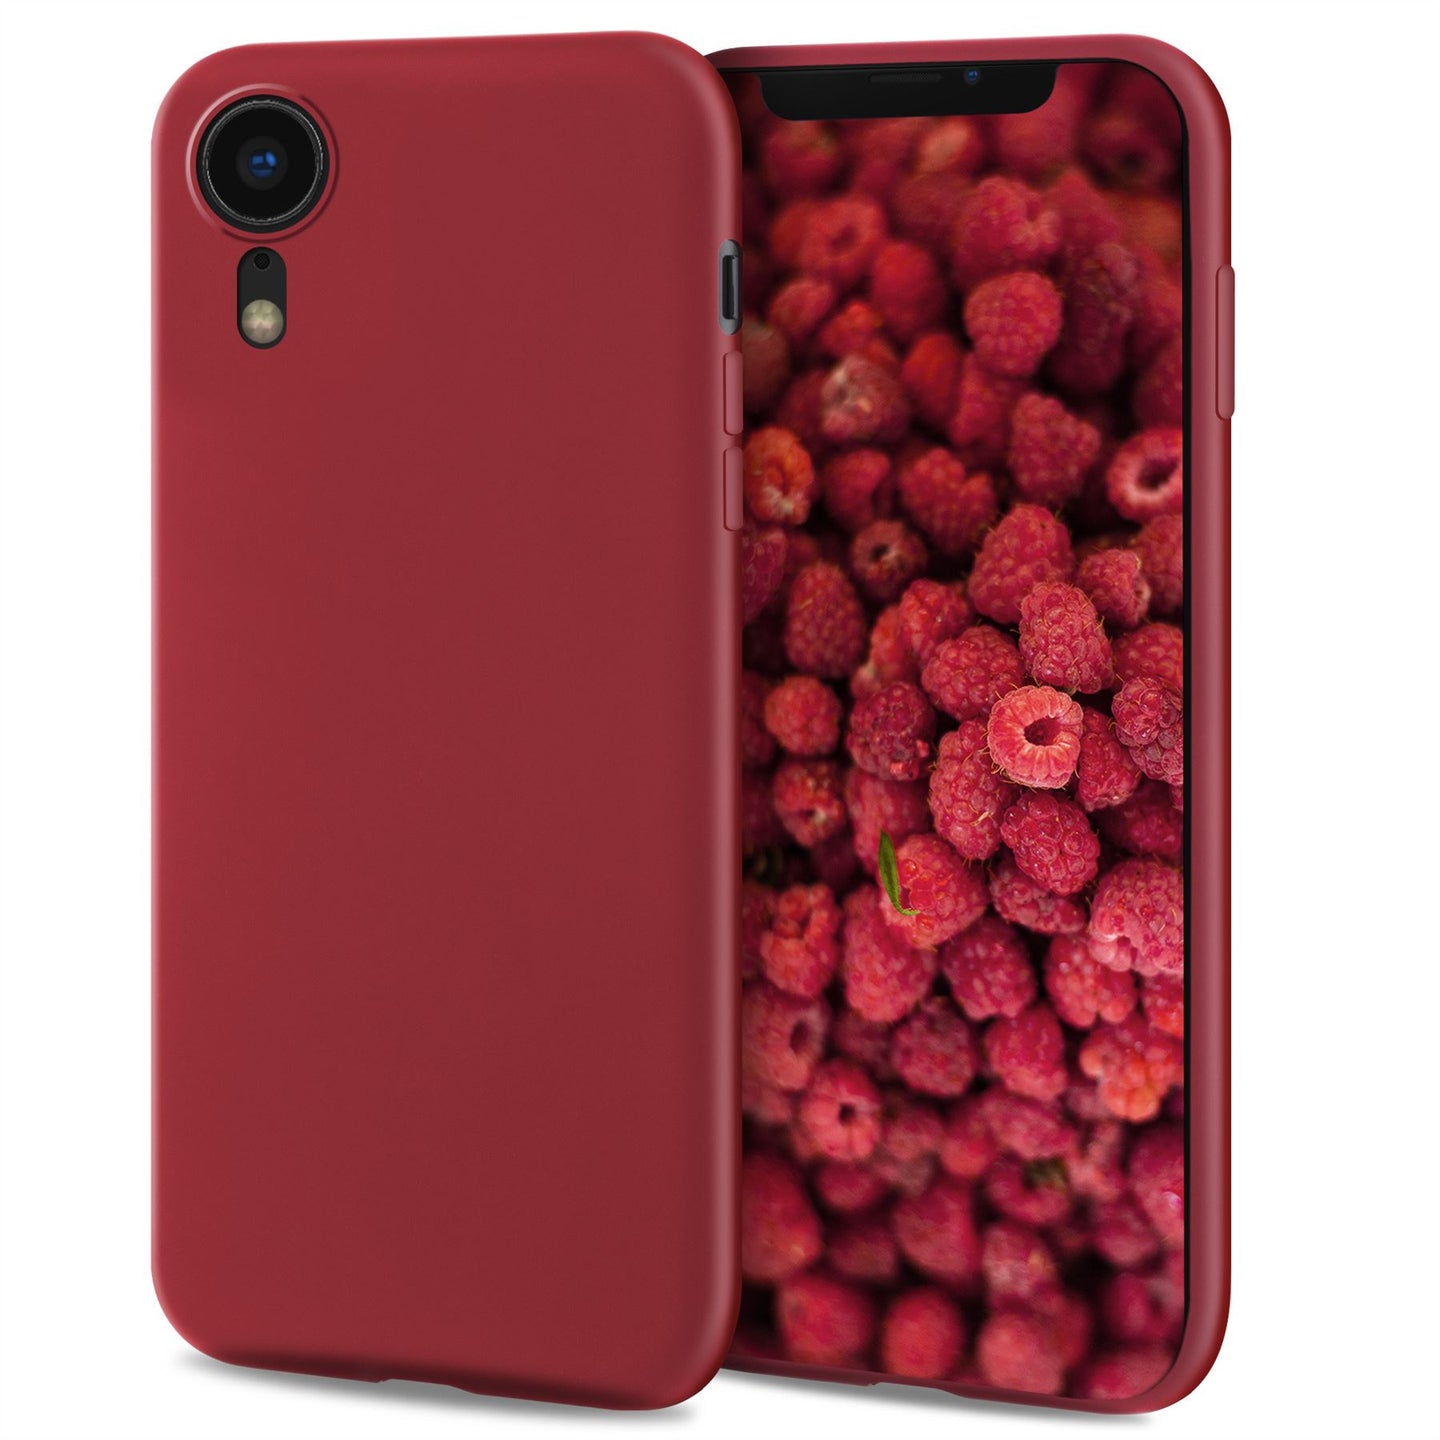 Moozy Lifestyle. Designed for iPhone XR Case, Vintage Pink - Liquid Silicone Cover with Matte Finish and Soft Microfiber Lining